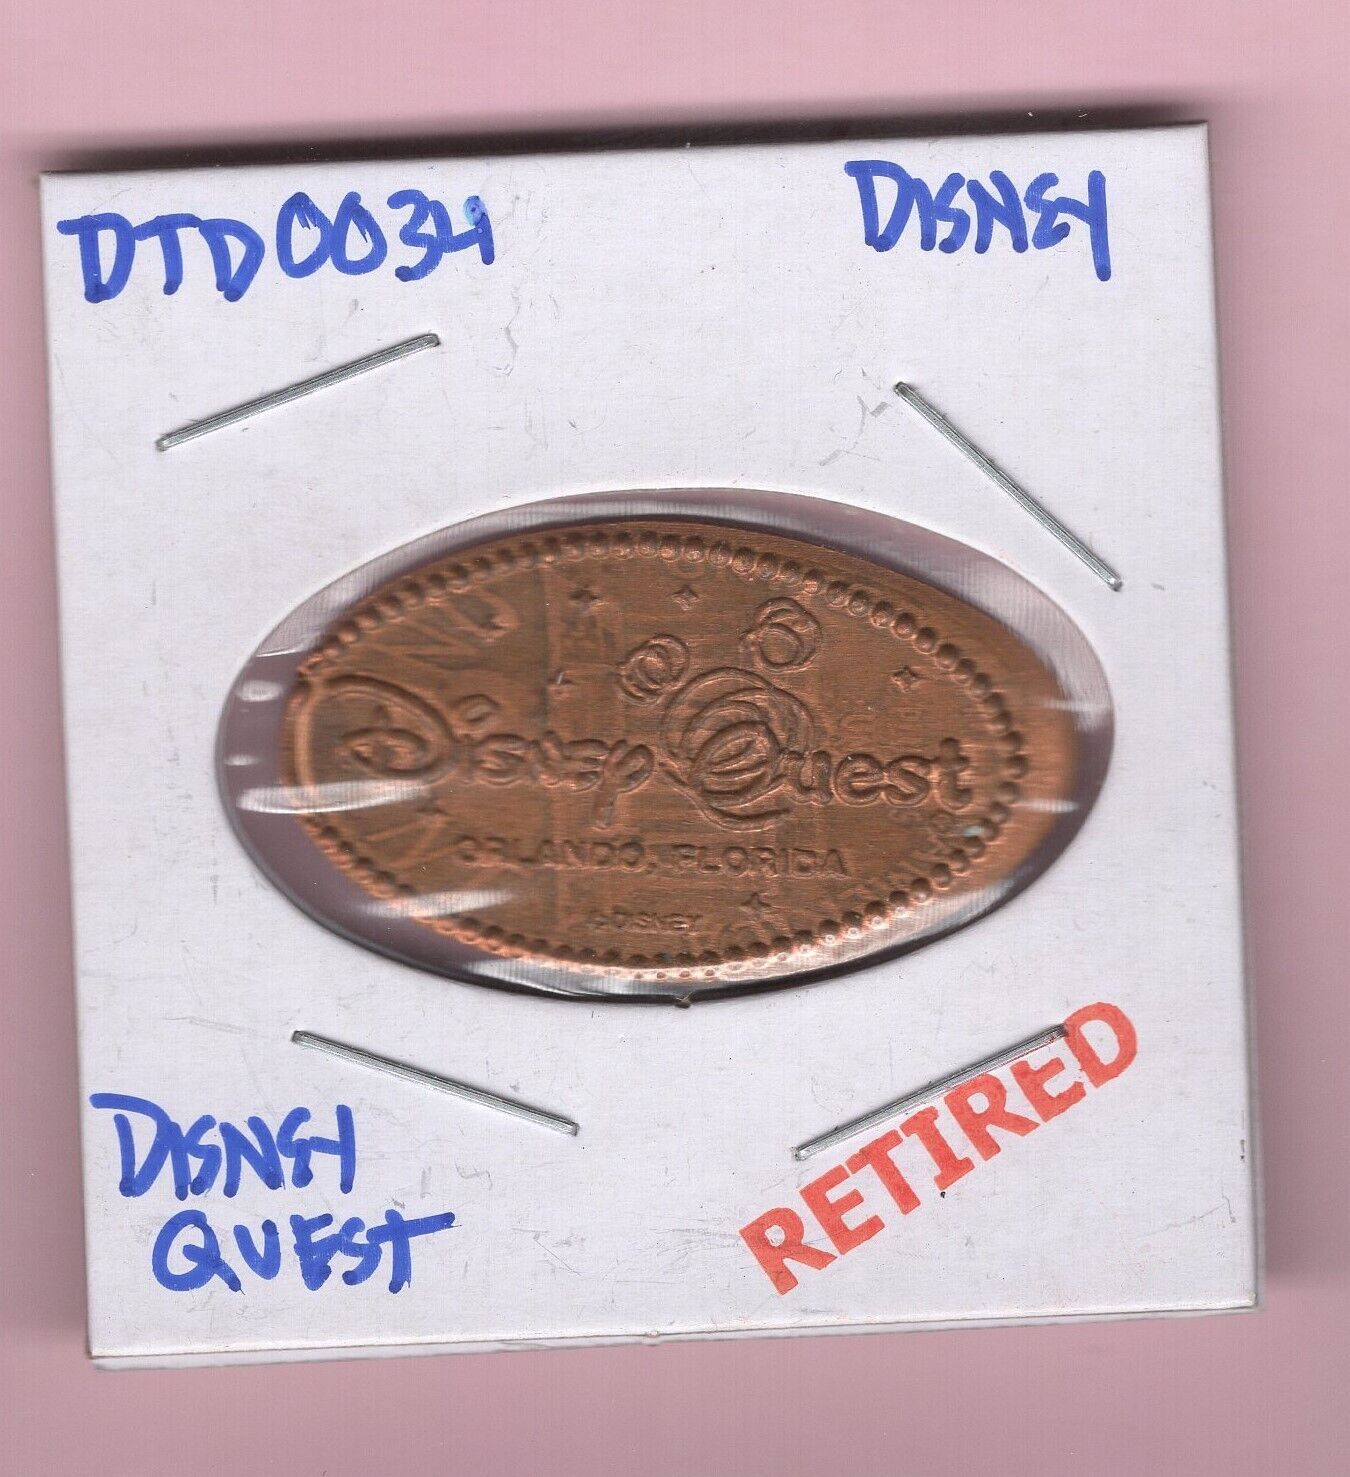 Disney Quest Dtd#0034 Retired Elongated Pressed Copper Penny